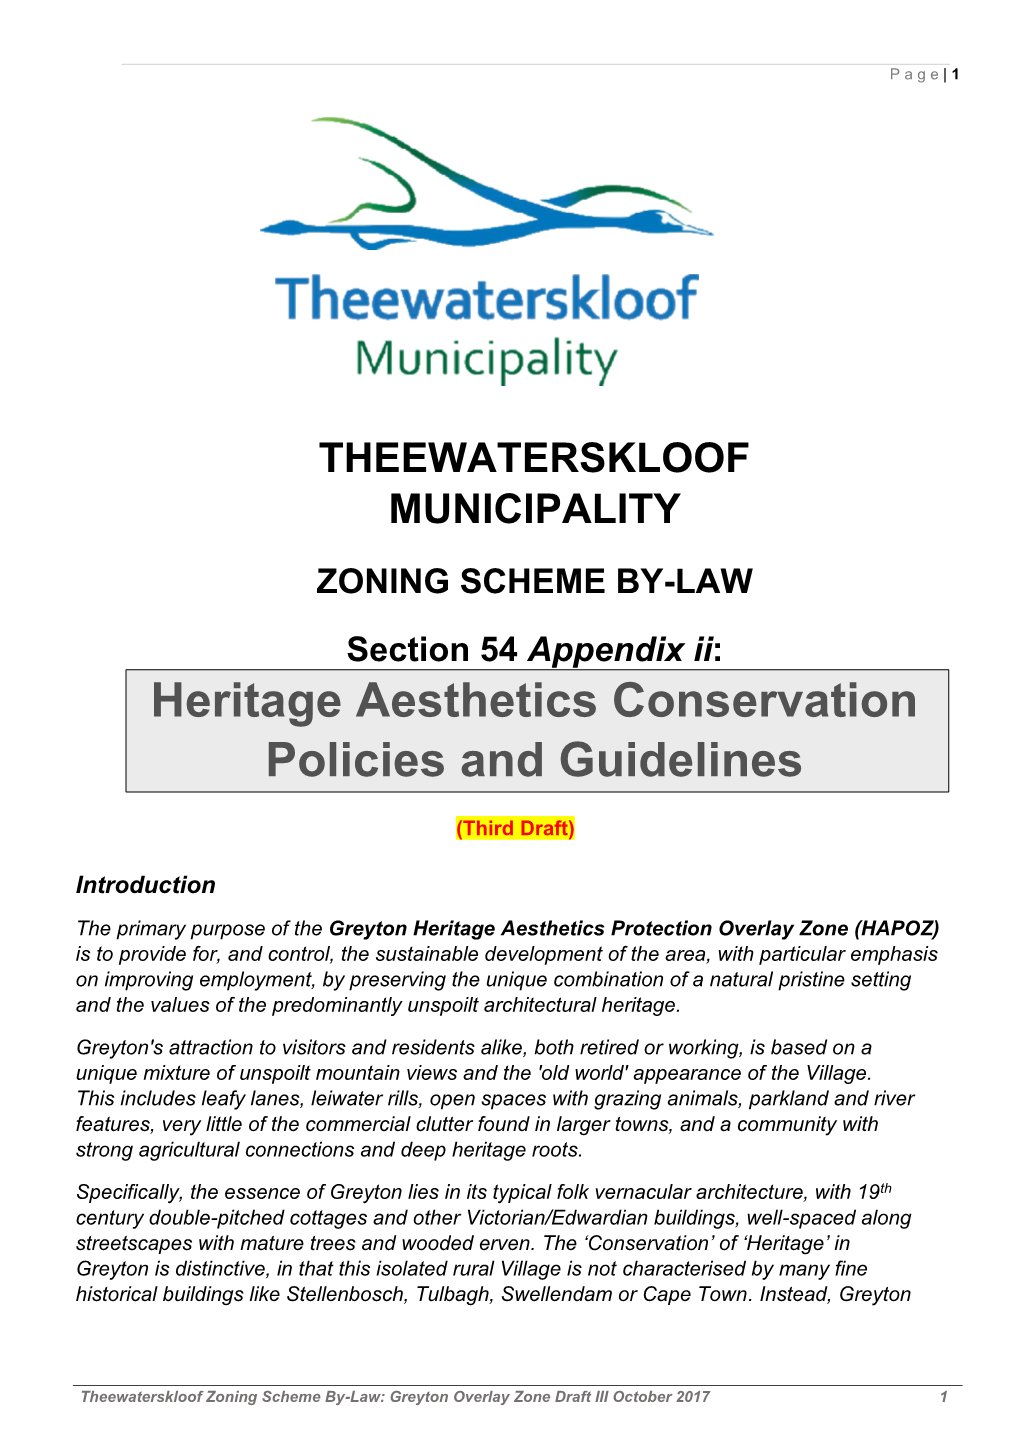 Heritage Aesthetics Conservation Policies and Guidelines